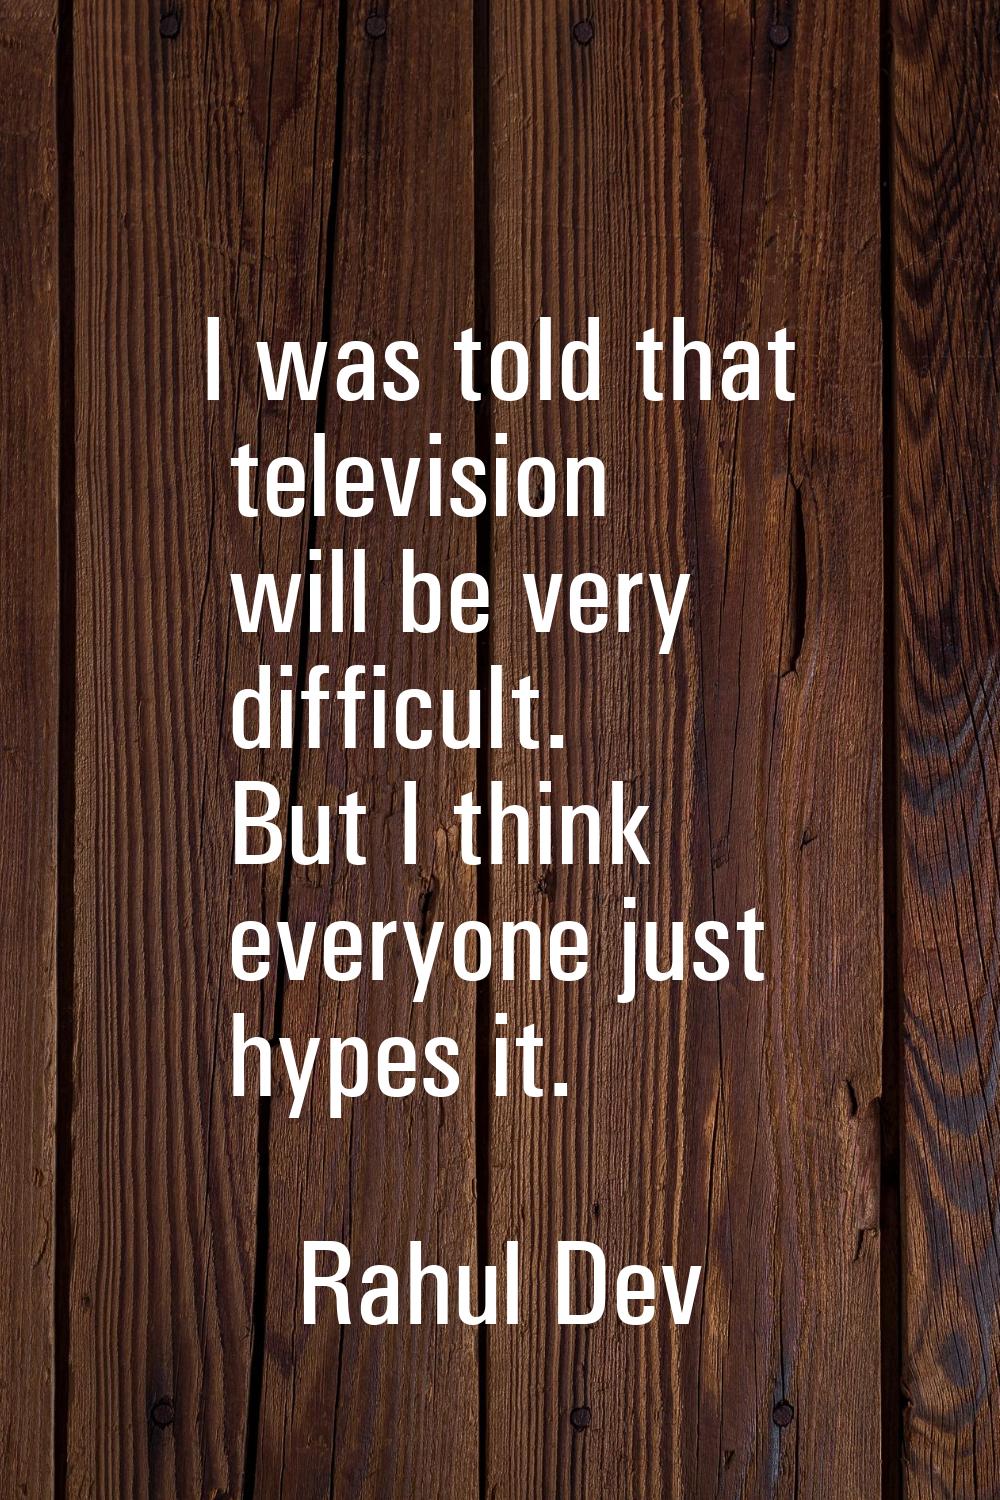 I was told that television will be very difficult. But I think everyone just hypes it.